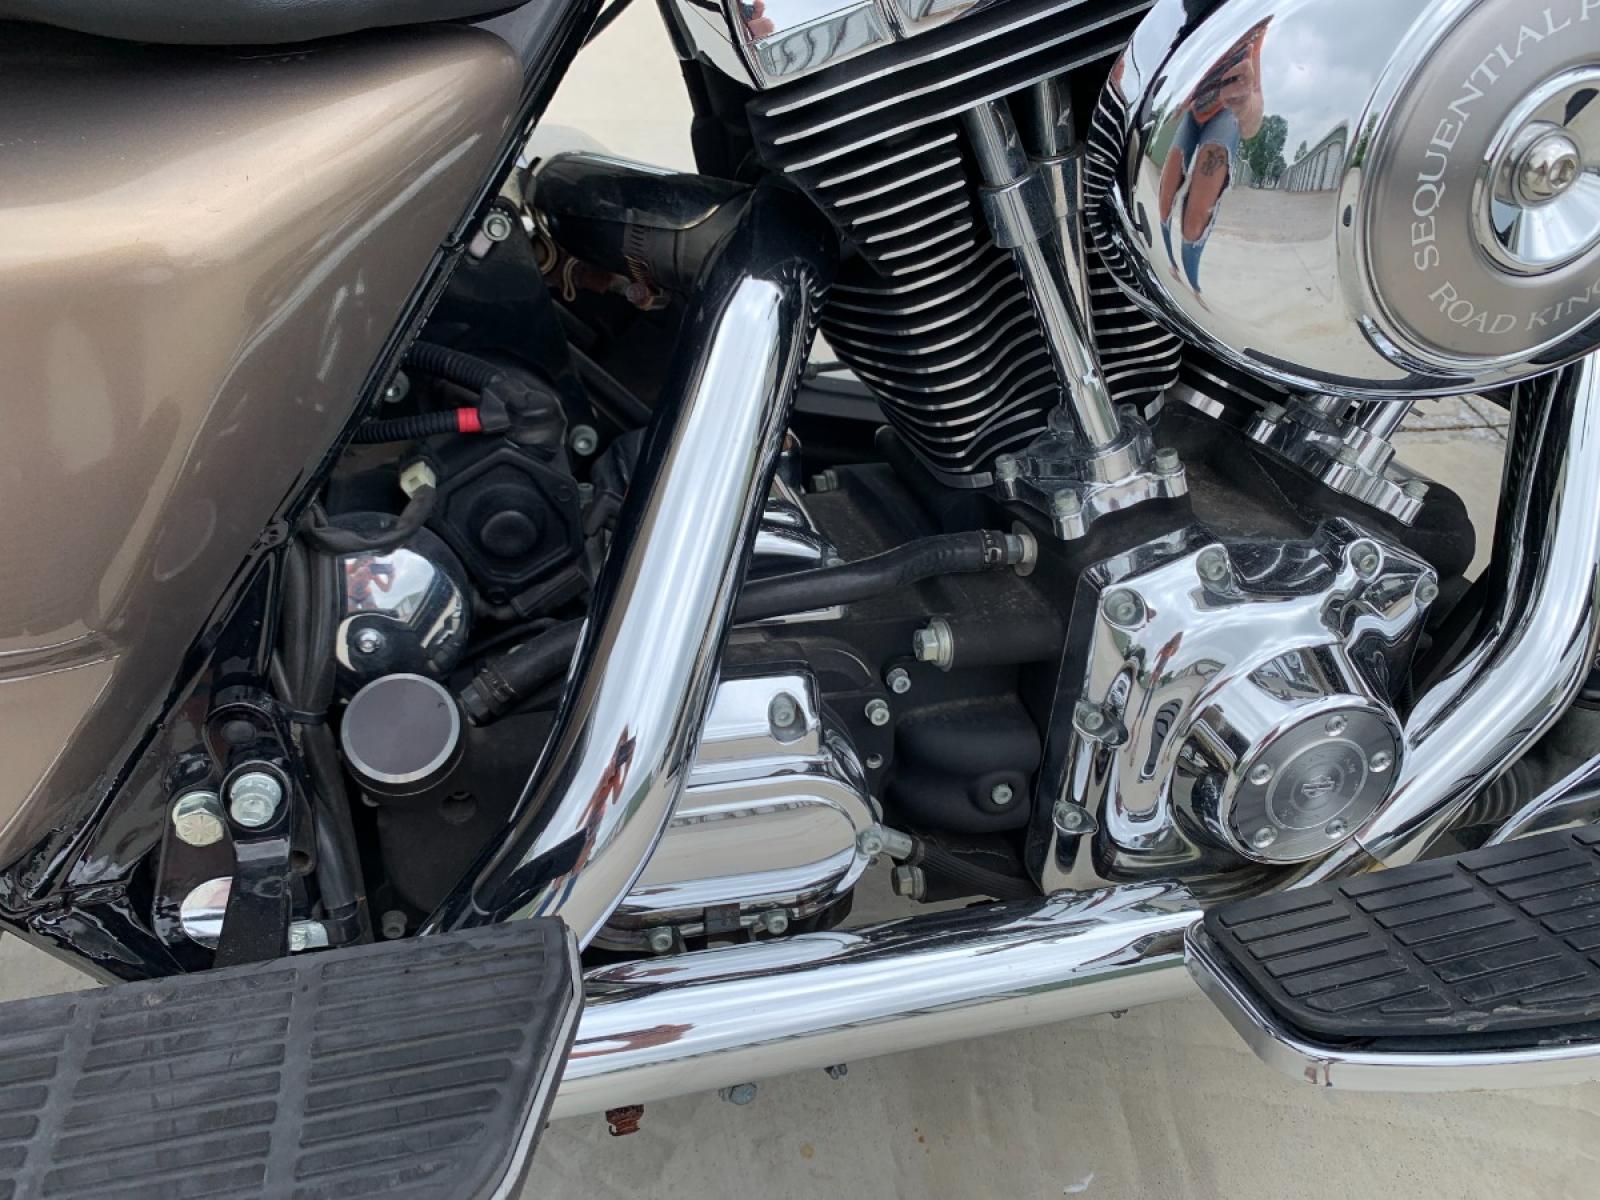 2004 GOLD Harley-Davidson FLHRCI ROAD KING (1HD1FRW104Y) with an 1450CC engine, 5 SPEED MANUAL transmission, located at 17760 HWY 62, MORRIS, 74445, 35.609104, -95.877060 - 2004 HARLEY DAVIDSON FLHRCI ROAD KING IS READY TO CRUISE THE HIGHWAYS. IT HAS A V2 FOUR-STROKE MOTOR, 1450CC, FEATURES LEATHER SEATS, ELECTRIC START, CRUISE CONTROL, 5-SPEED MANUAL, VANCE AND HINES DUAL EXHAUST, AND LEATHER-COVERED COMPOSITE SADDLEBAGS. IT APPEARS TO BE GARAGE KEPT. REBUILT TITLE D - Photo #12